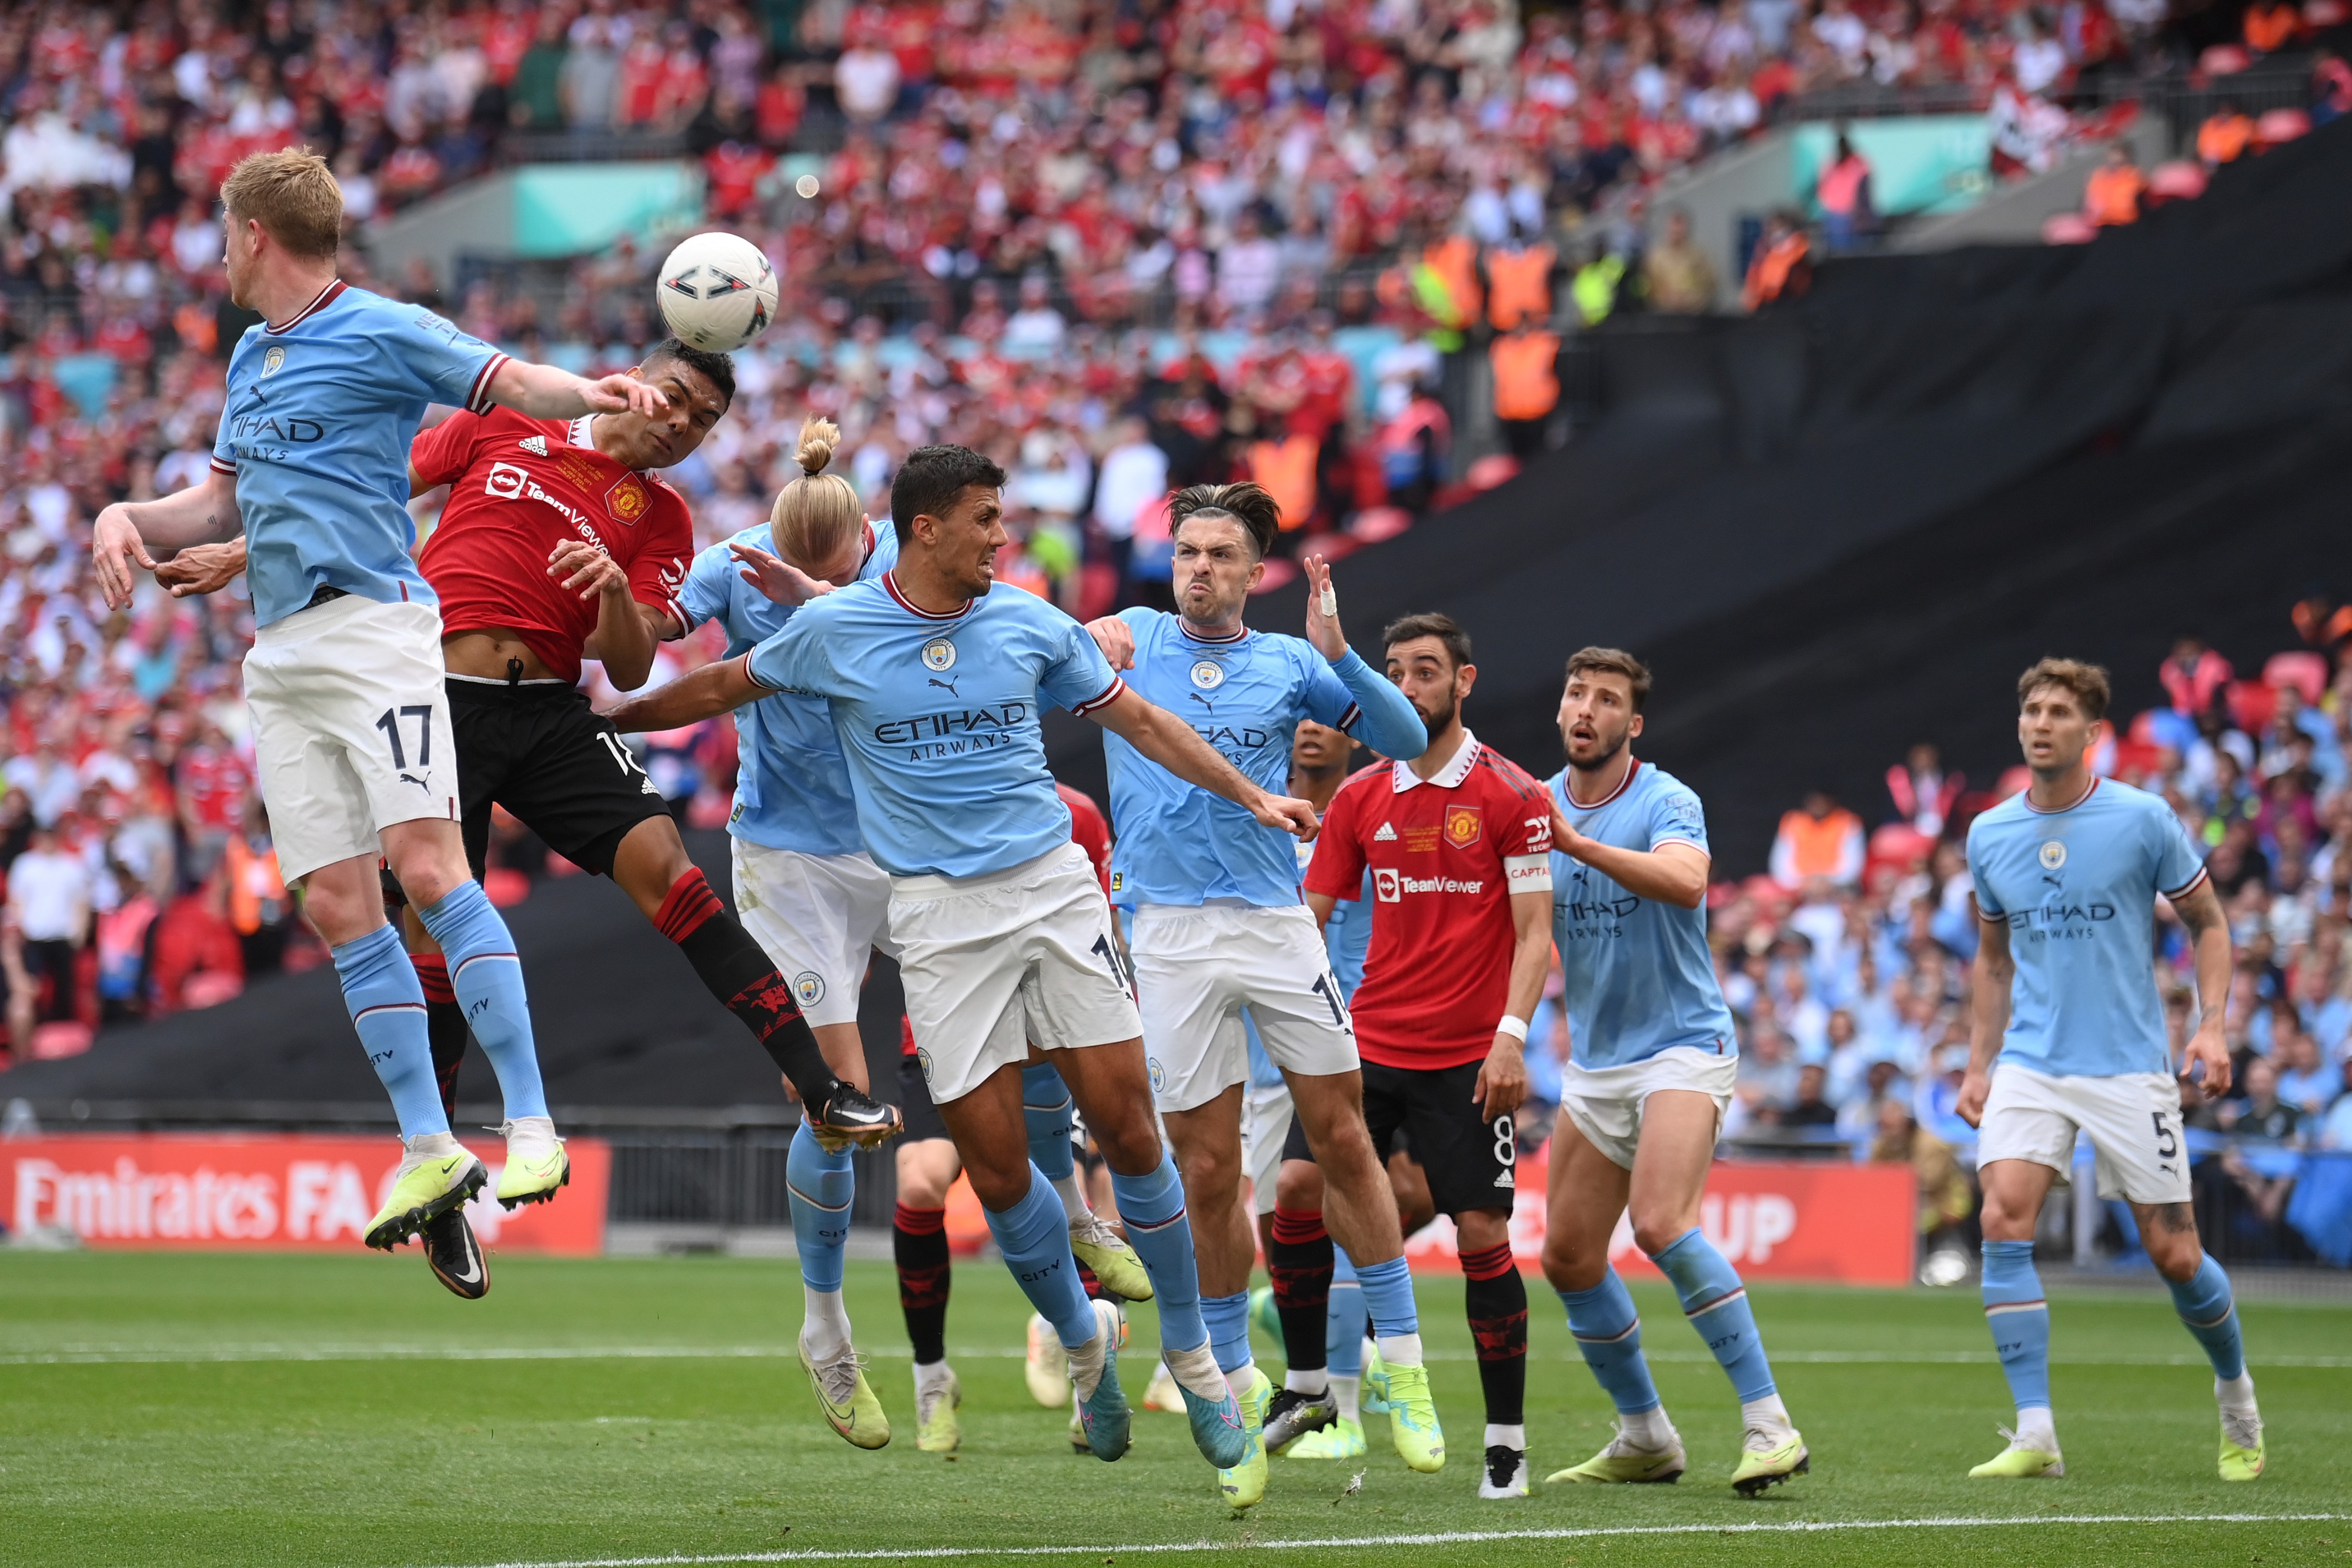 Man United and Man City will play the FA Cup Final for the second consecutive season